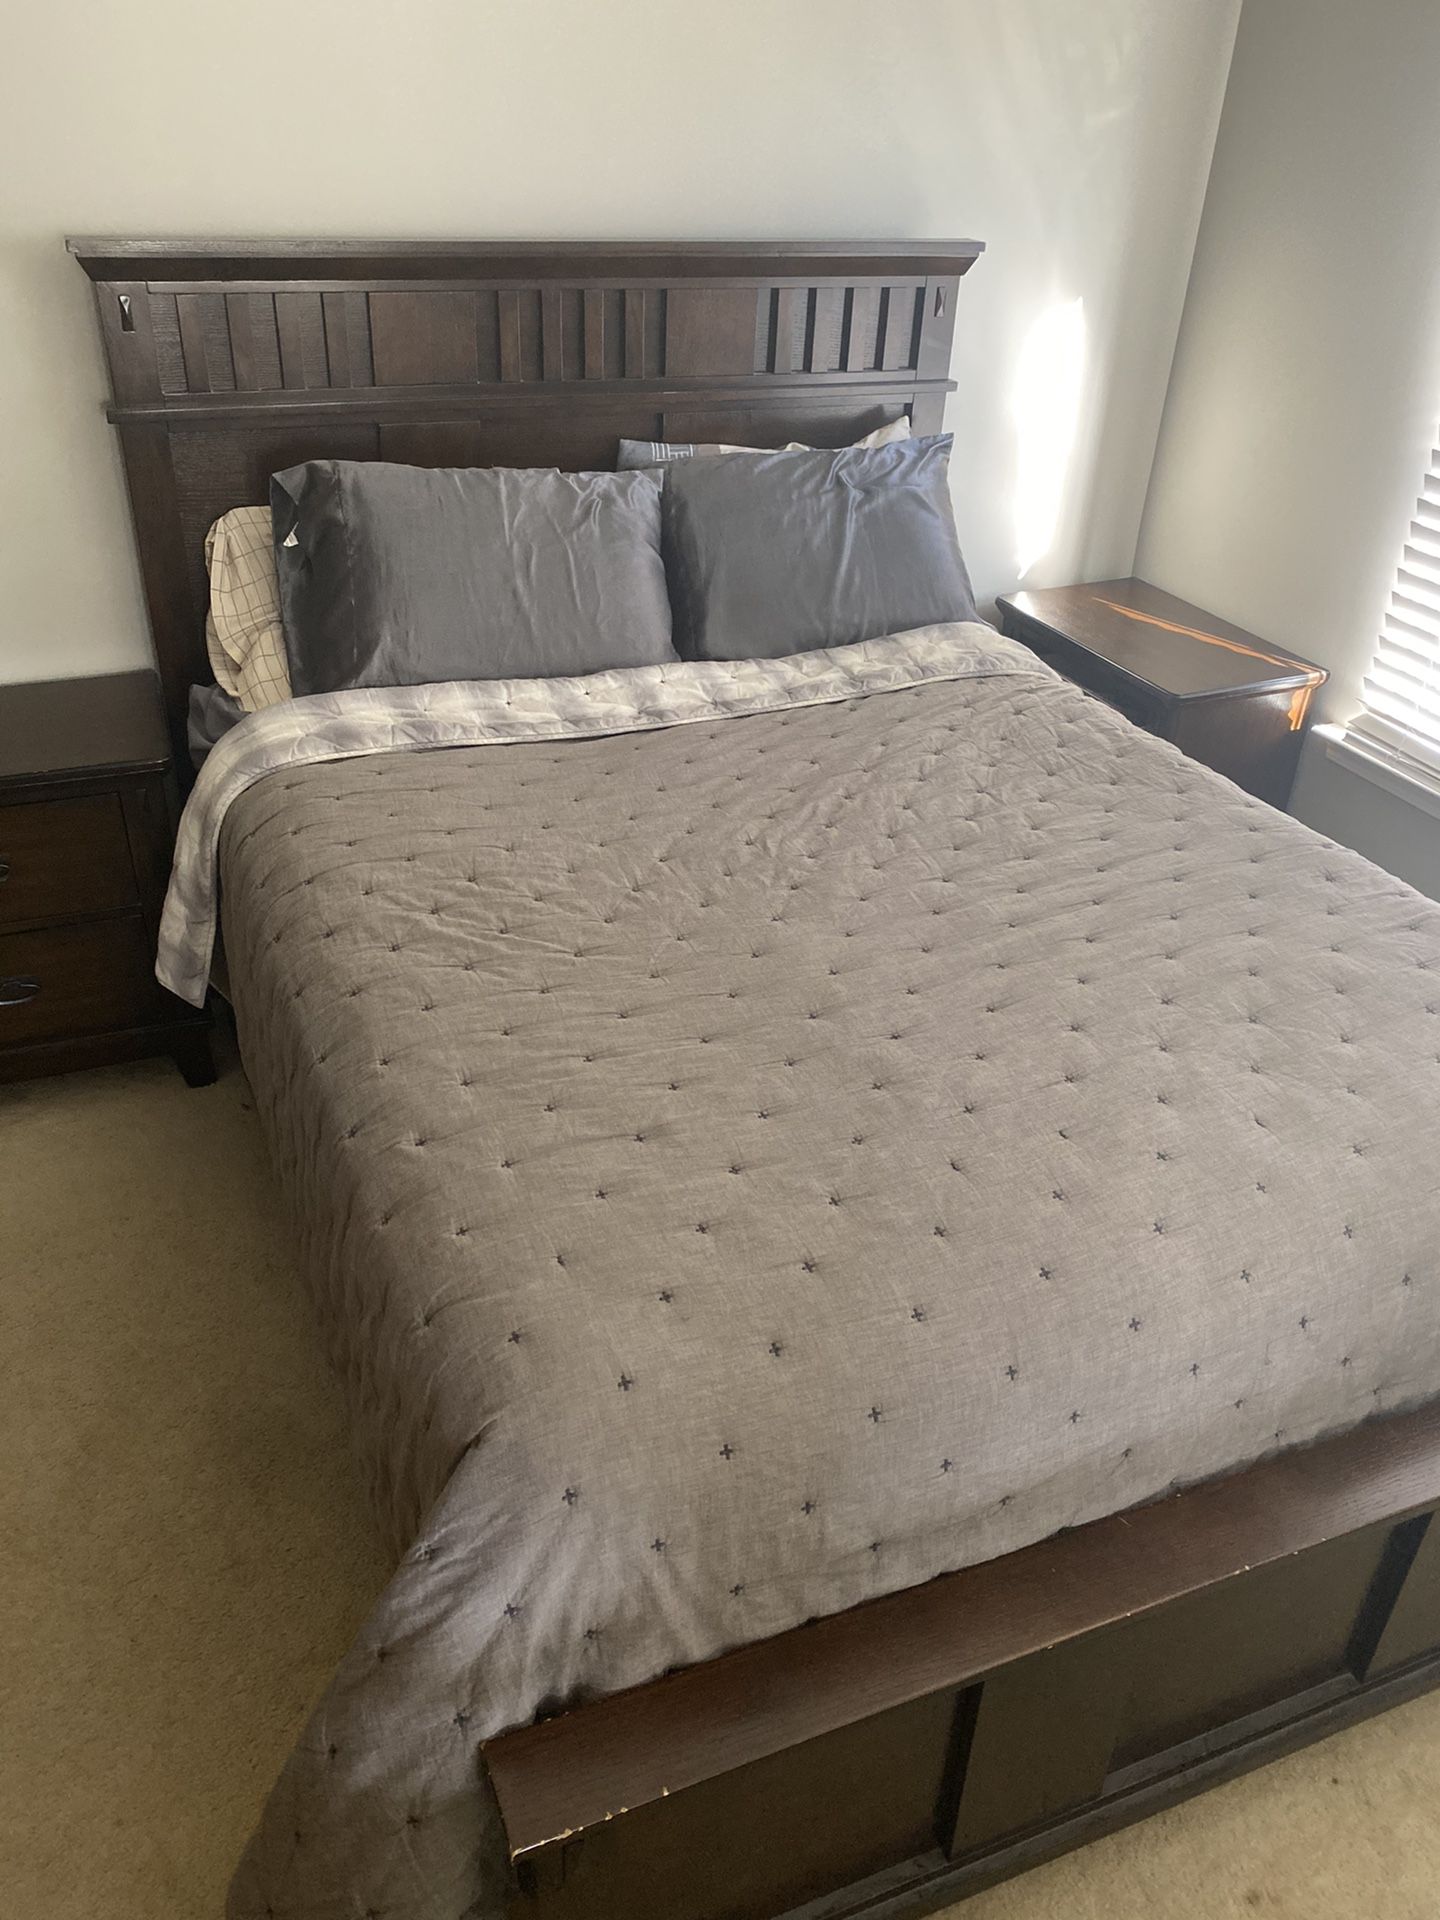 Queen bed Frame and accessories